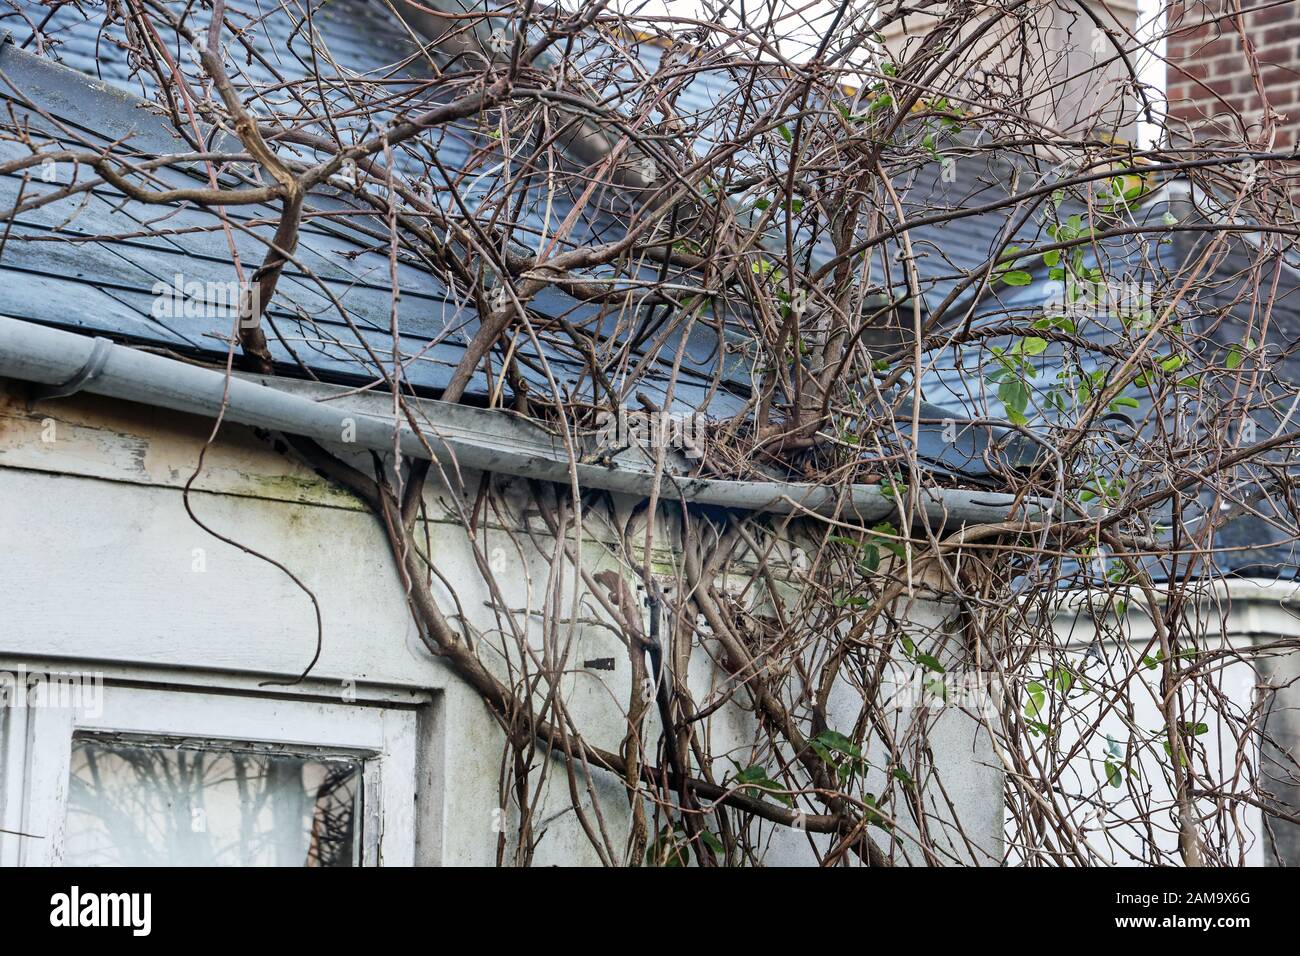 damage-to-gutter-caused-by-an-uncontrolled-wisteria-plant-shows-the-need-for-house-maintenance-2AM9X6G.jpg